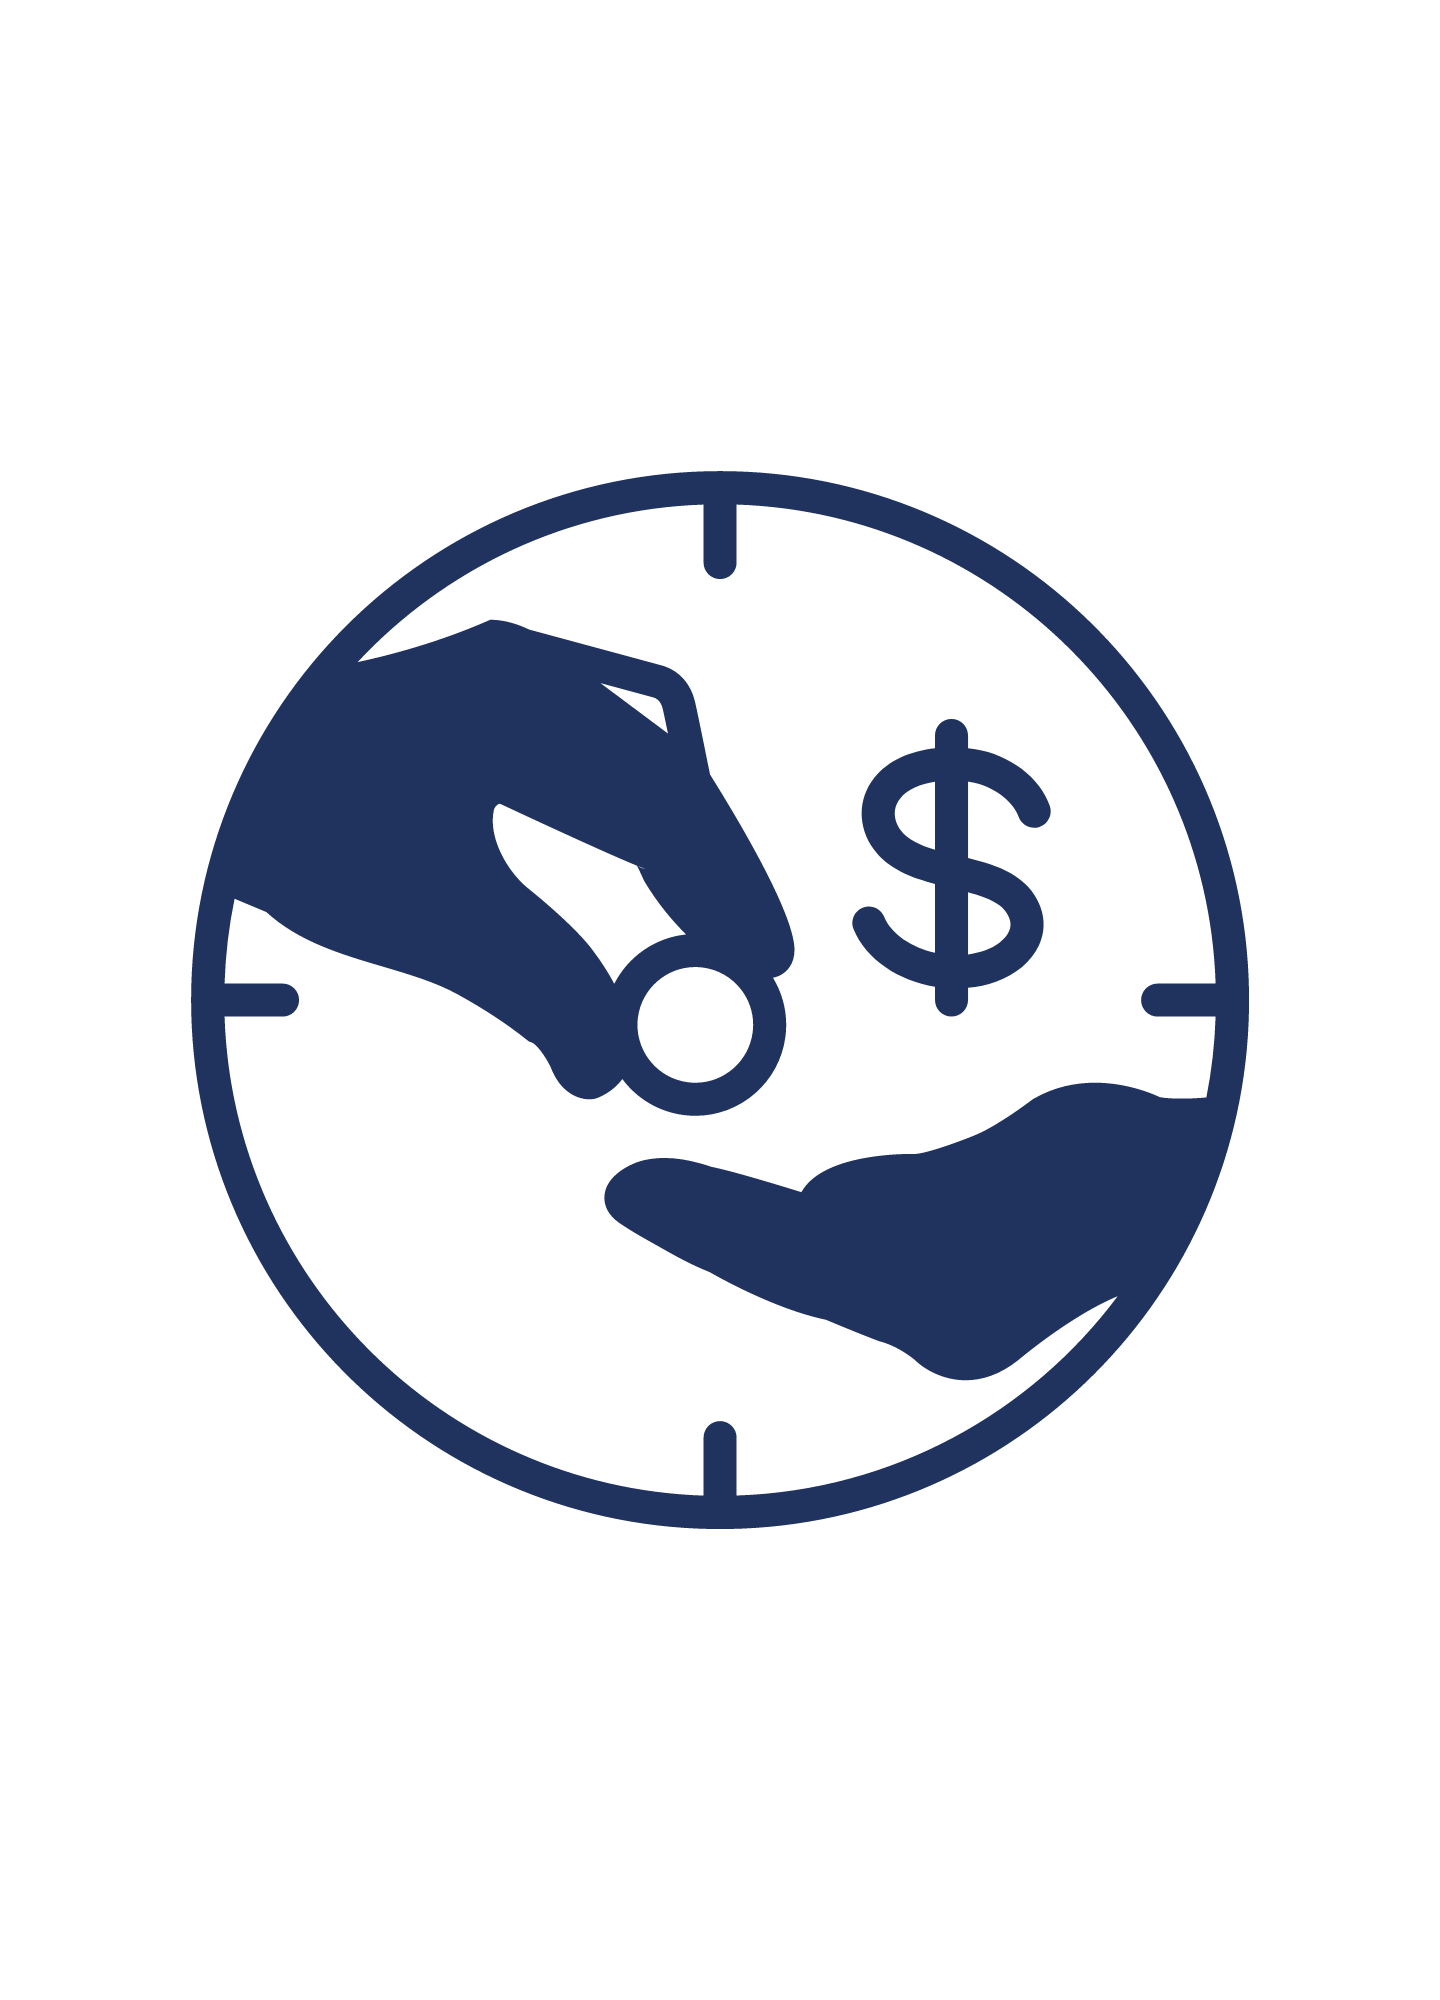 Two hands giving money inside a clock. Super Guarantee changes for cash flow